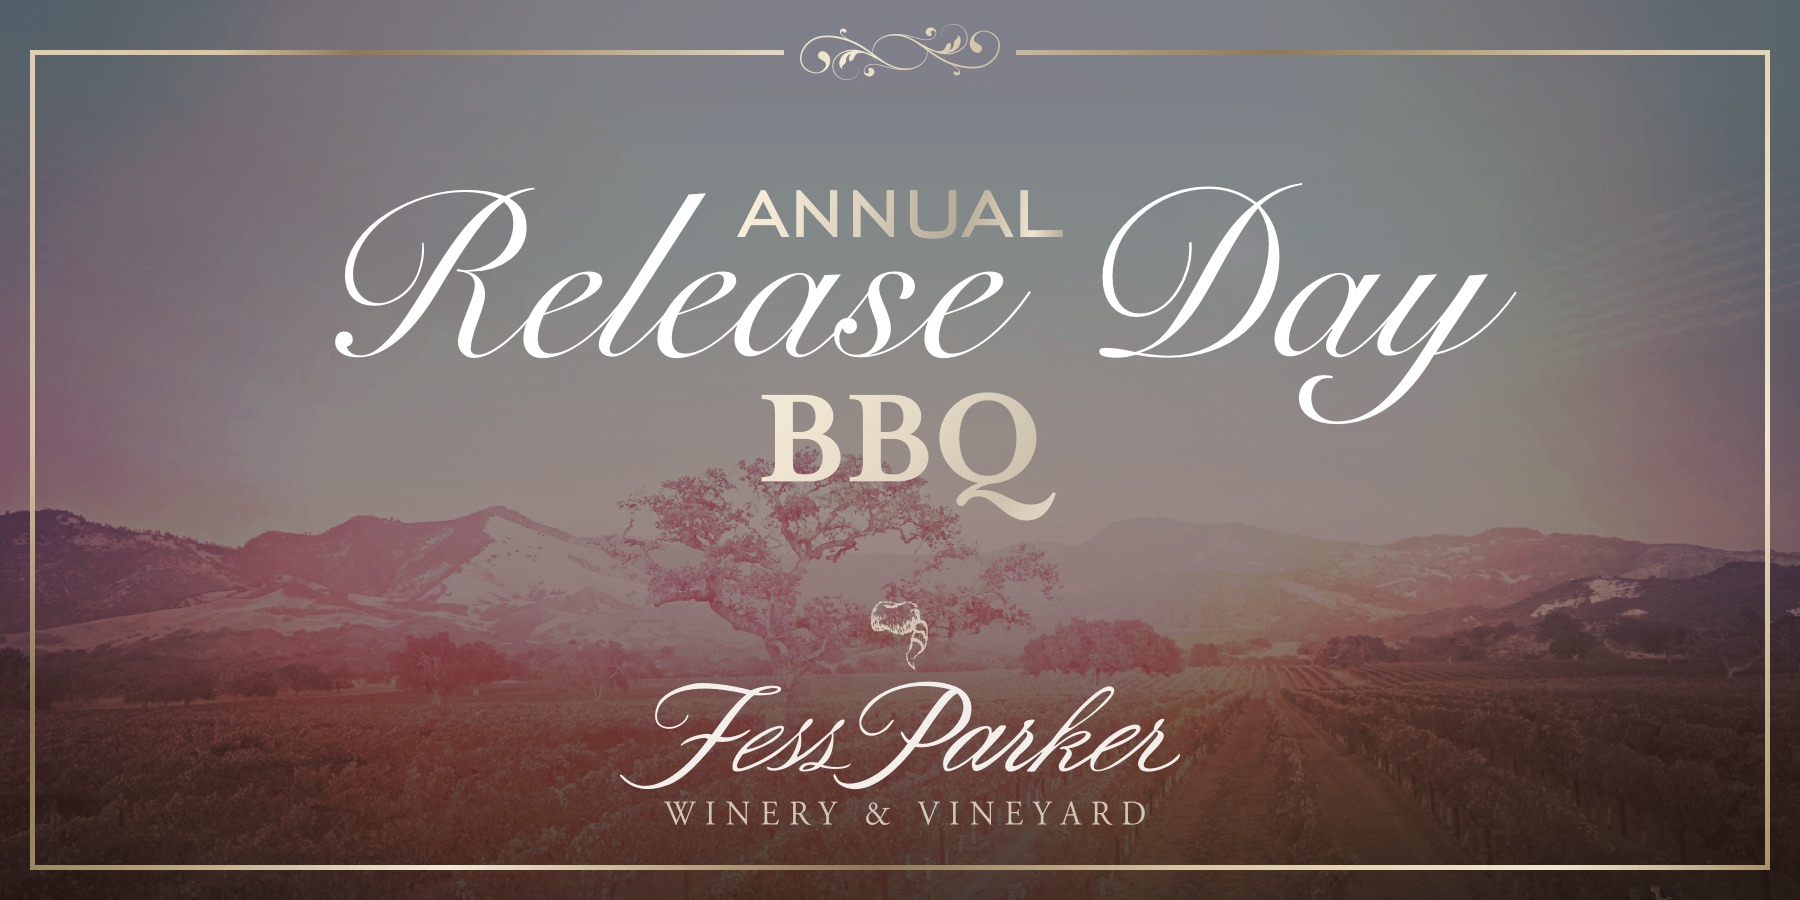  2023 Annual Release Day BBQ